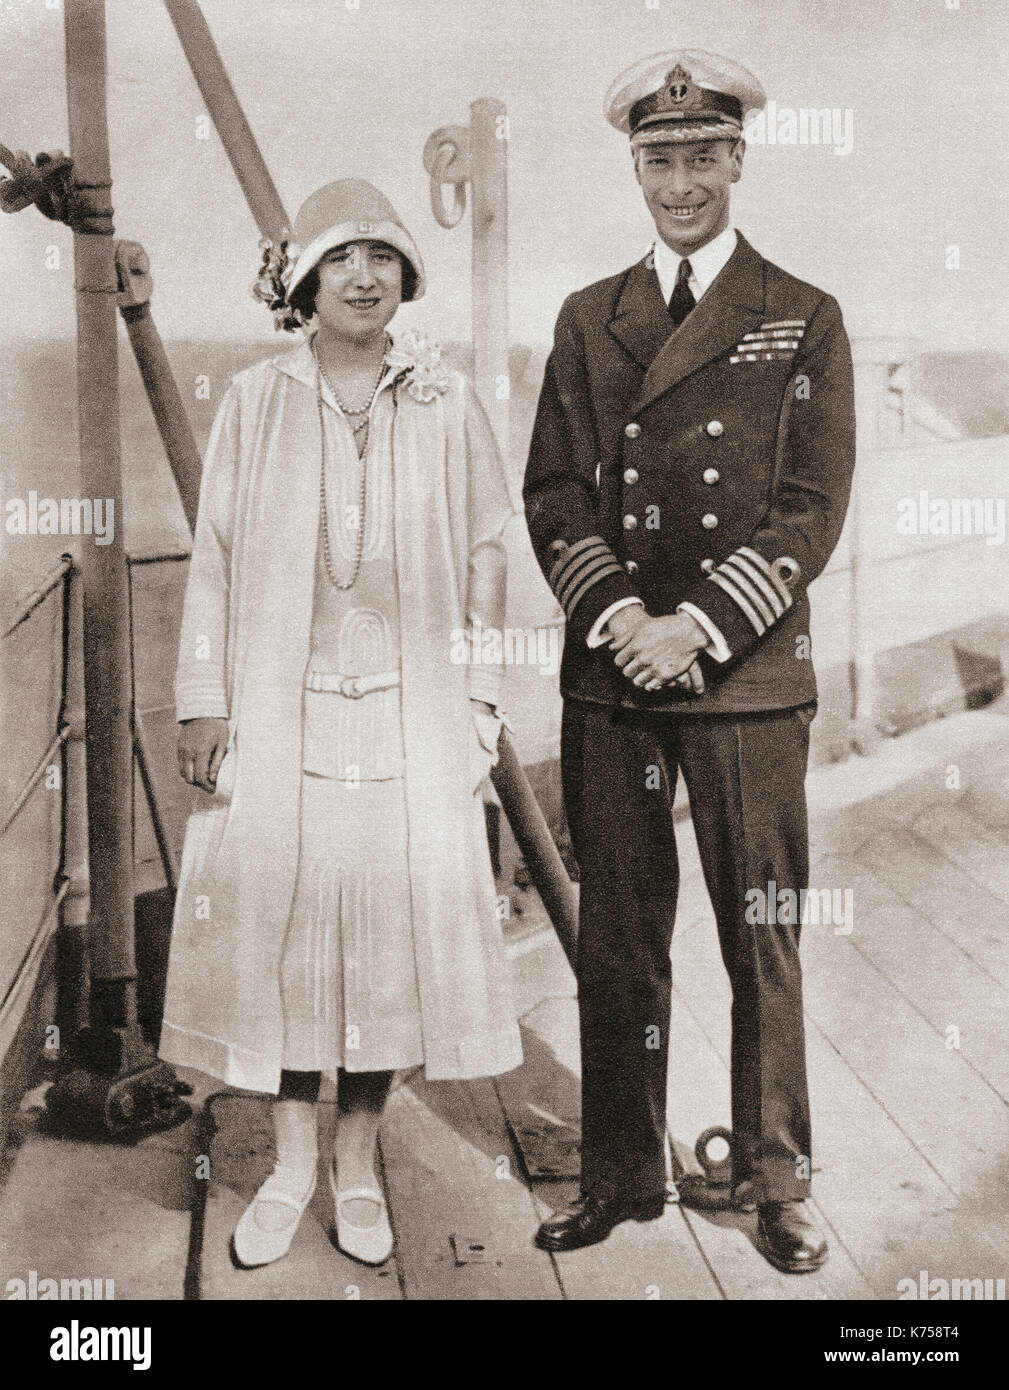 The Duke and Duchess of York during their tour of the Empire in 1927.  Prince Albert, Duke of York, future George VI, 1895 – 1952.  King of the United Kingdom and the Dominions of the British Commonwealth.  Duchess of York, future Queen Elizabeth, The Queen Mother.  Elizabeth Angela Marguerite Bowes-Lyon, 1900 – 2002.  Wife of King George VI and mother of Queen Elizabeth II.  From The Coronation Book of King George VI and Queen Elizabeth, published 1937. Stock Photo